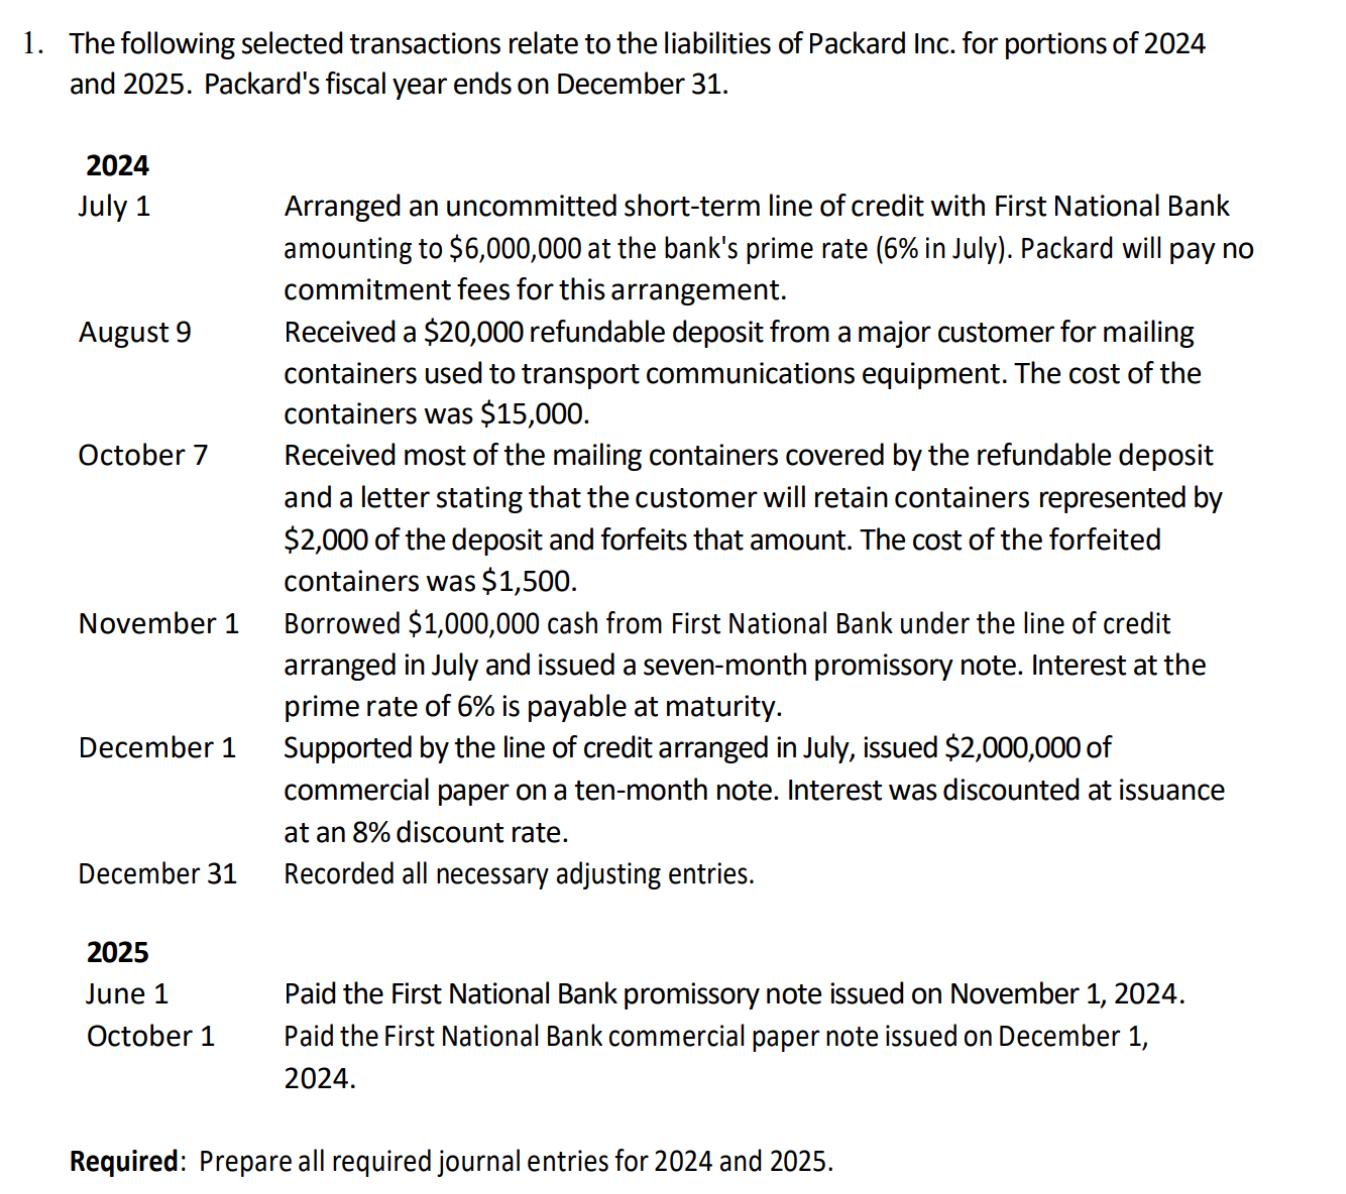 1. The following selected transactions relate to the liabilities of Packard Inc. for portions of 2024 and